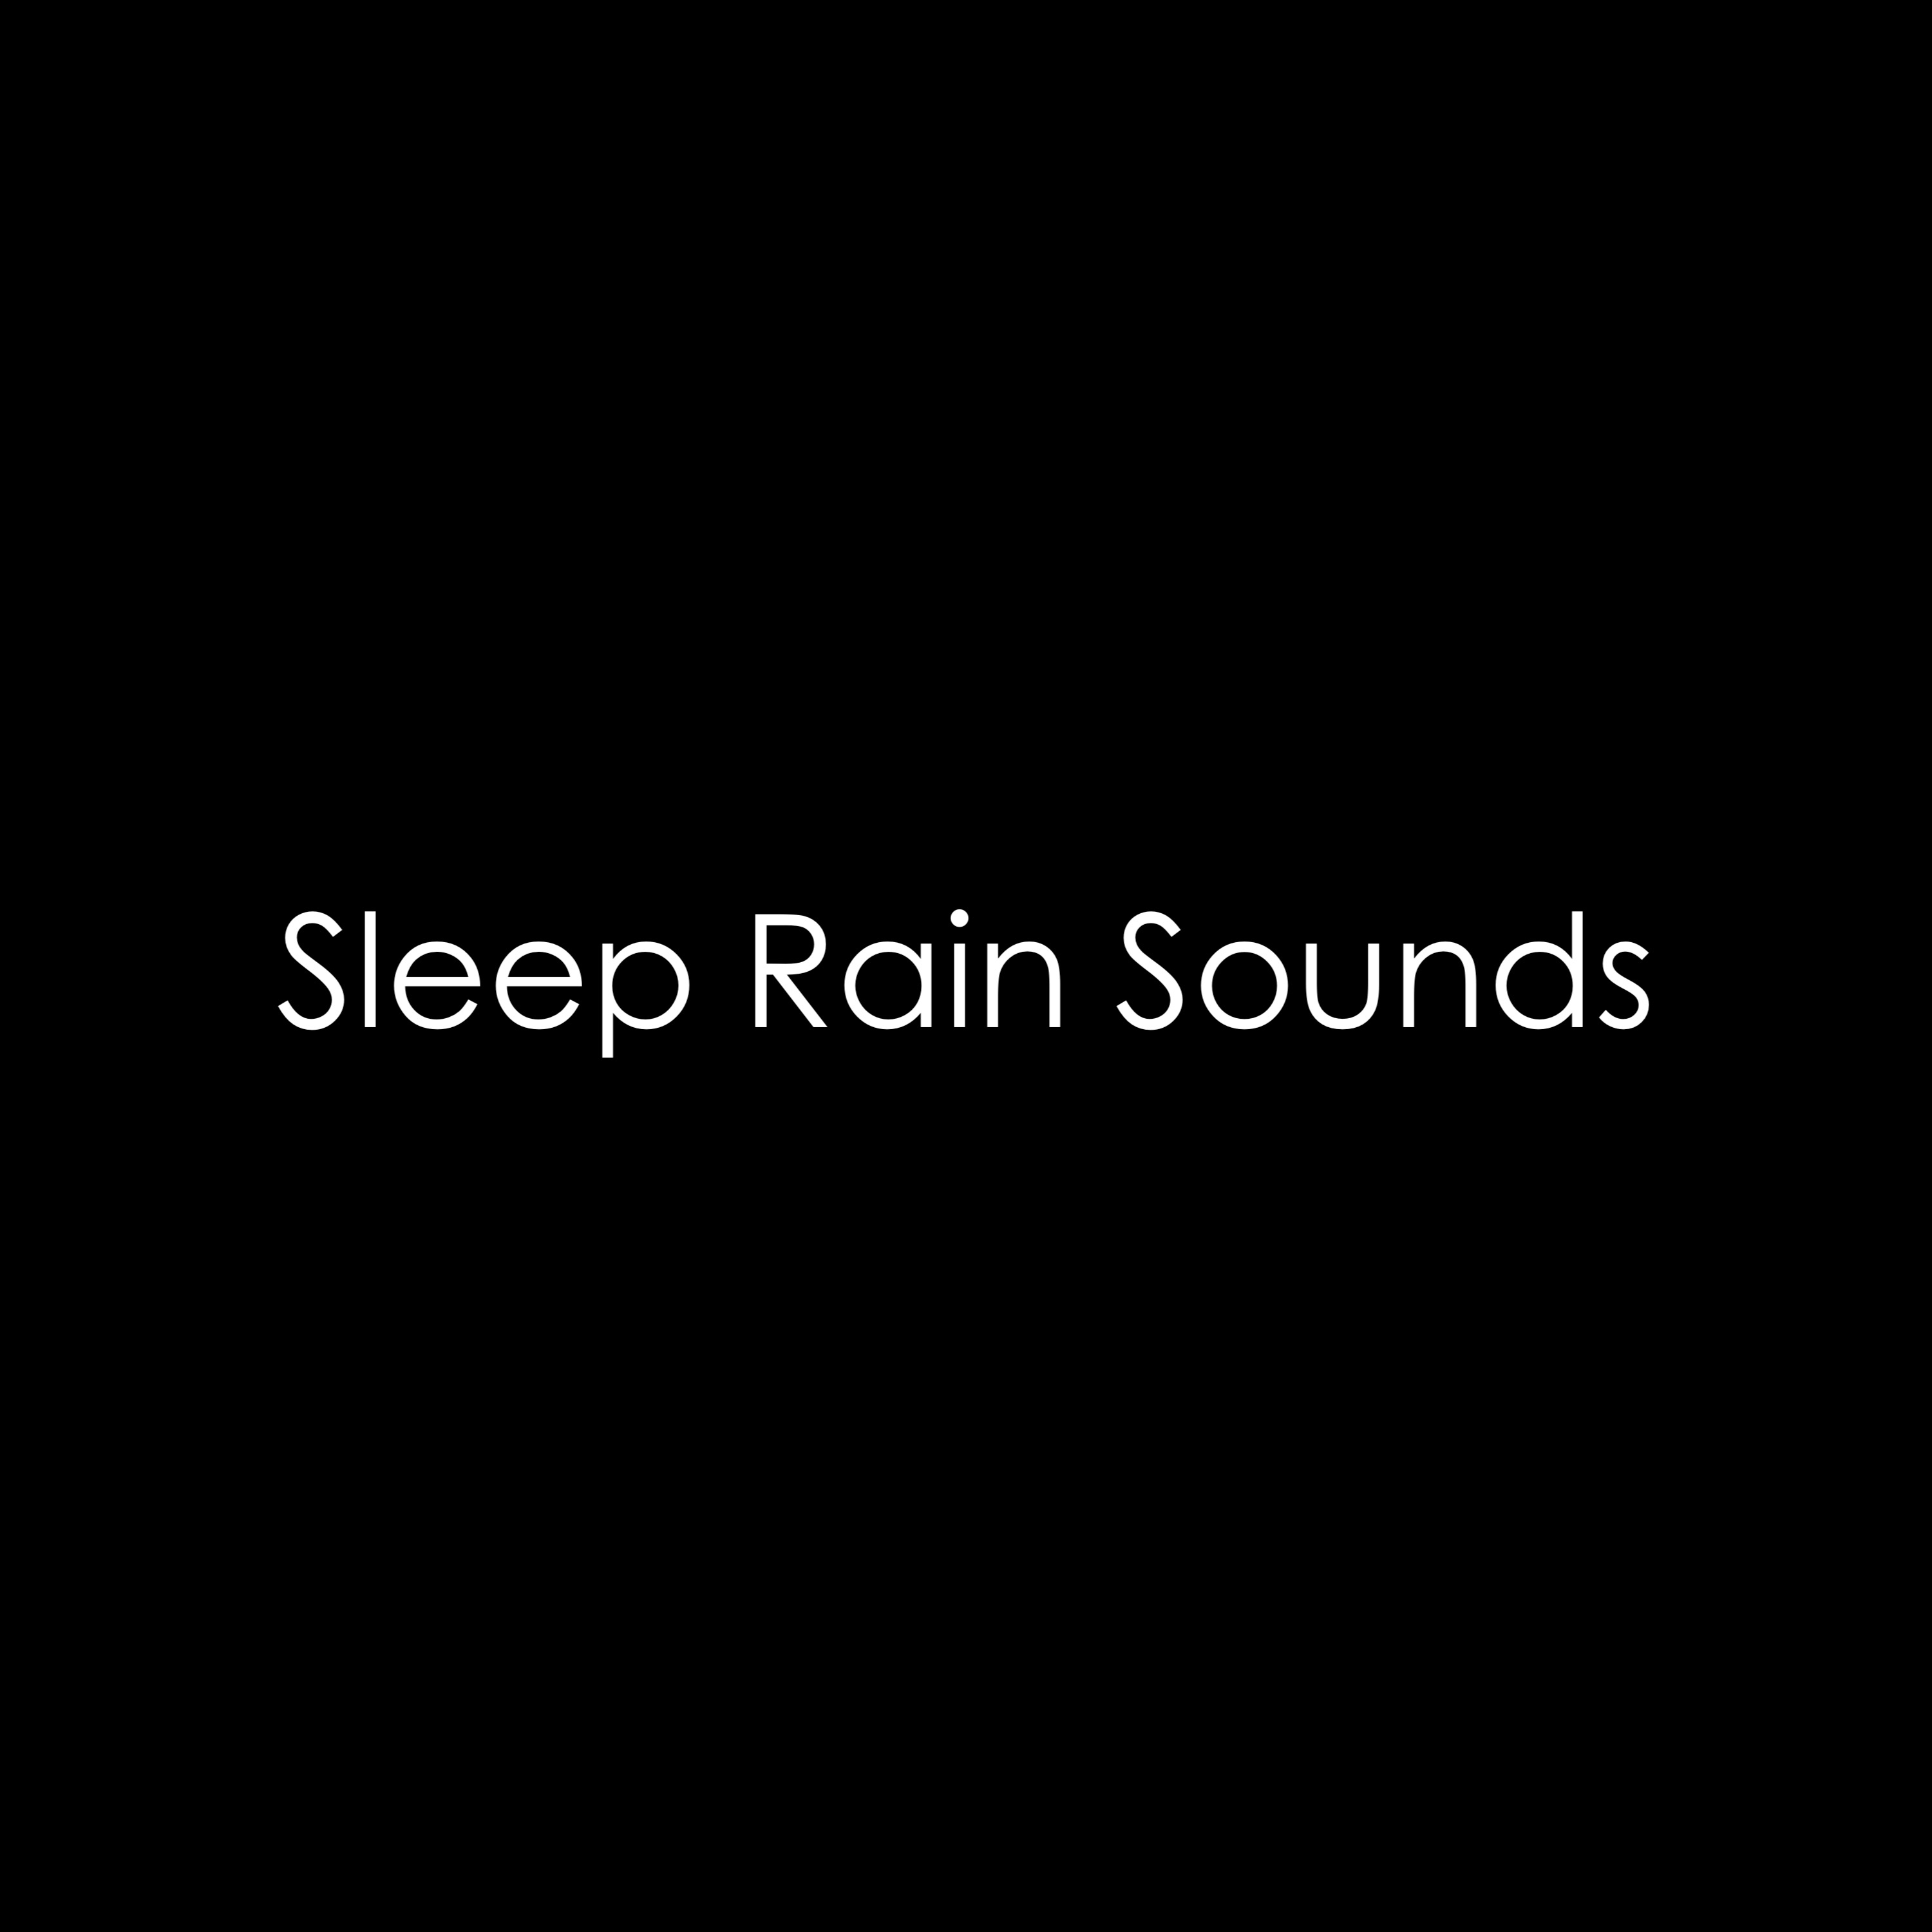 19 Sleep Rain Sounds: Peaceful, Relaxing and Loopable for a Perfect Nights Sleep